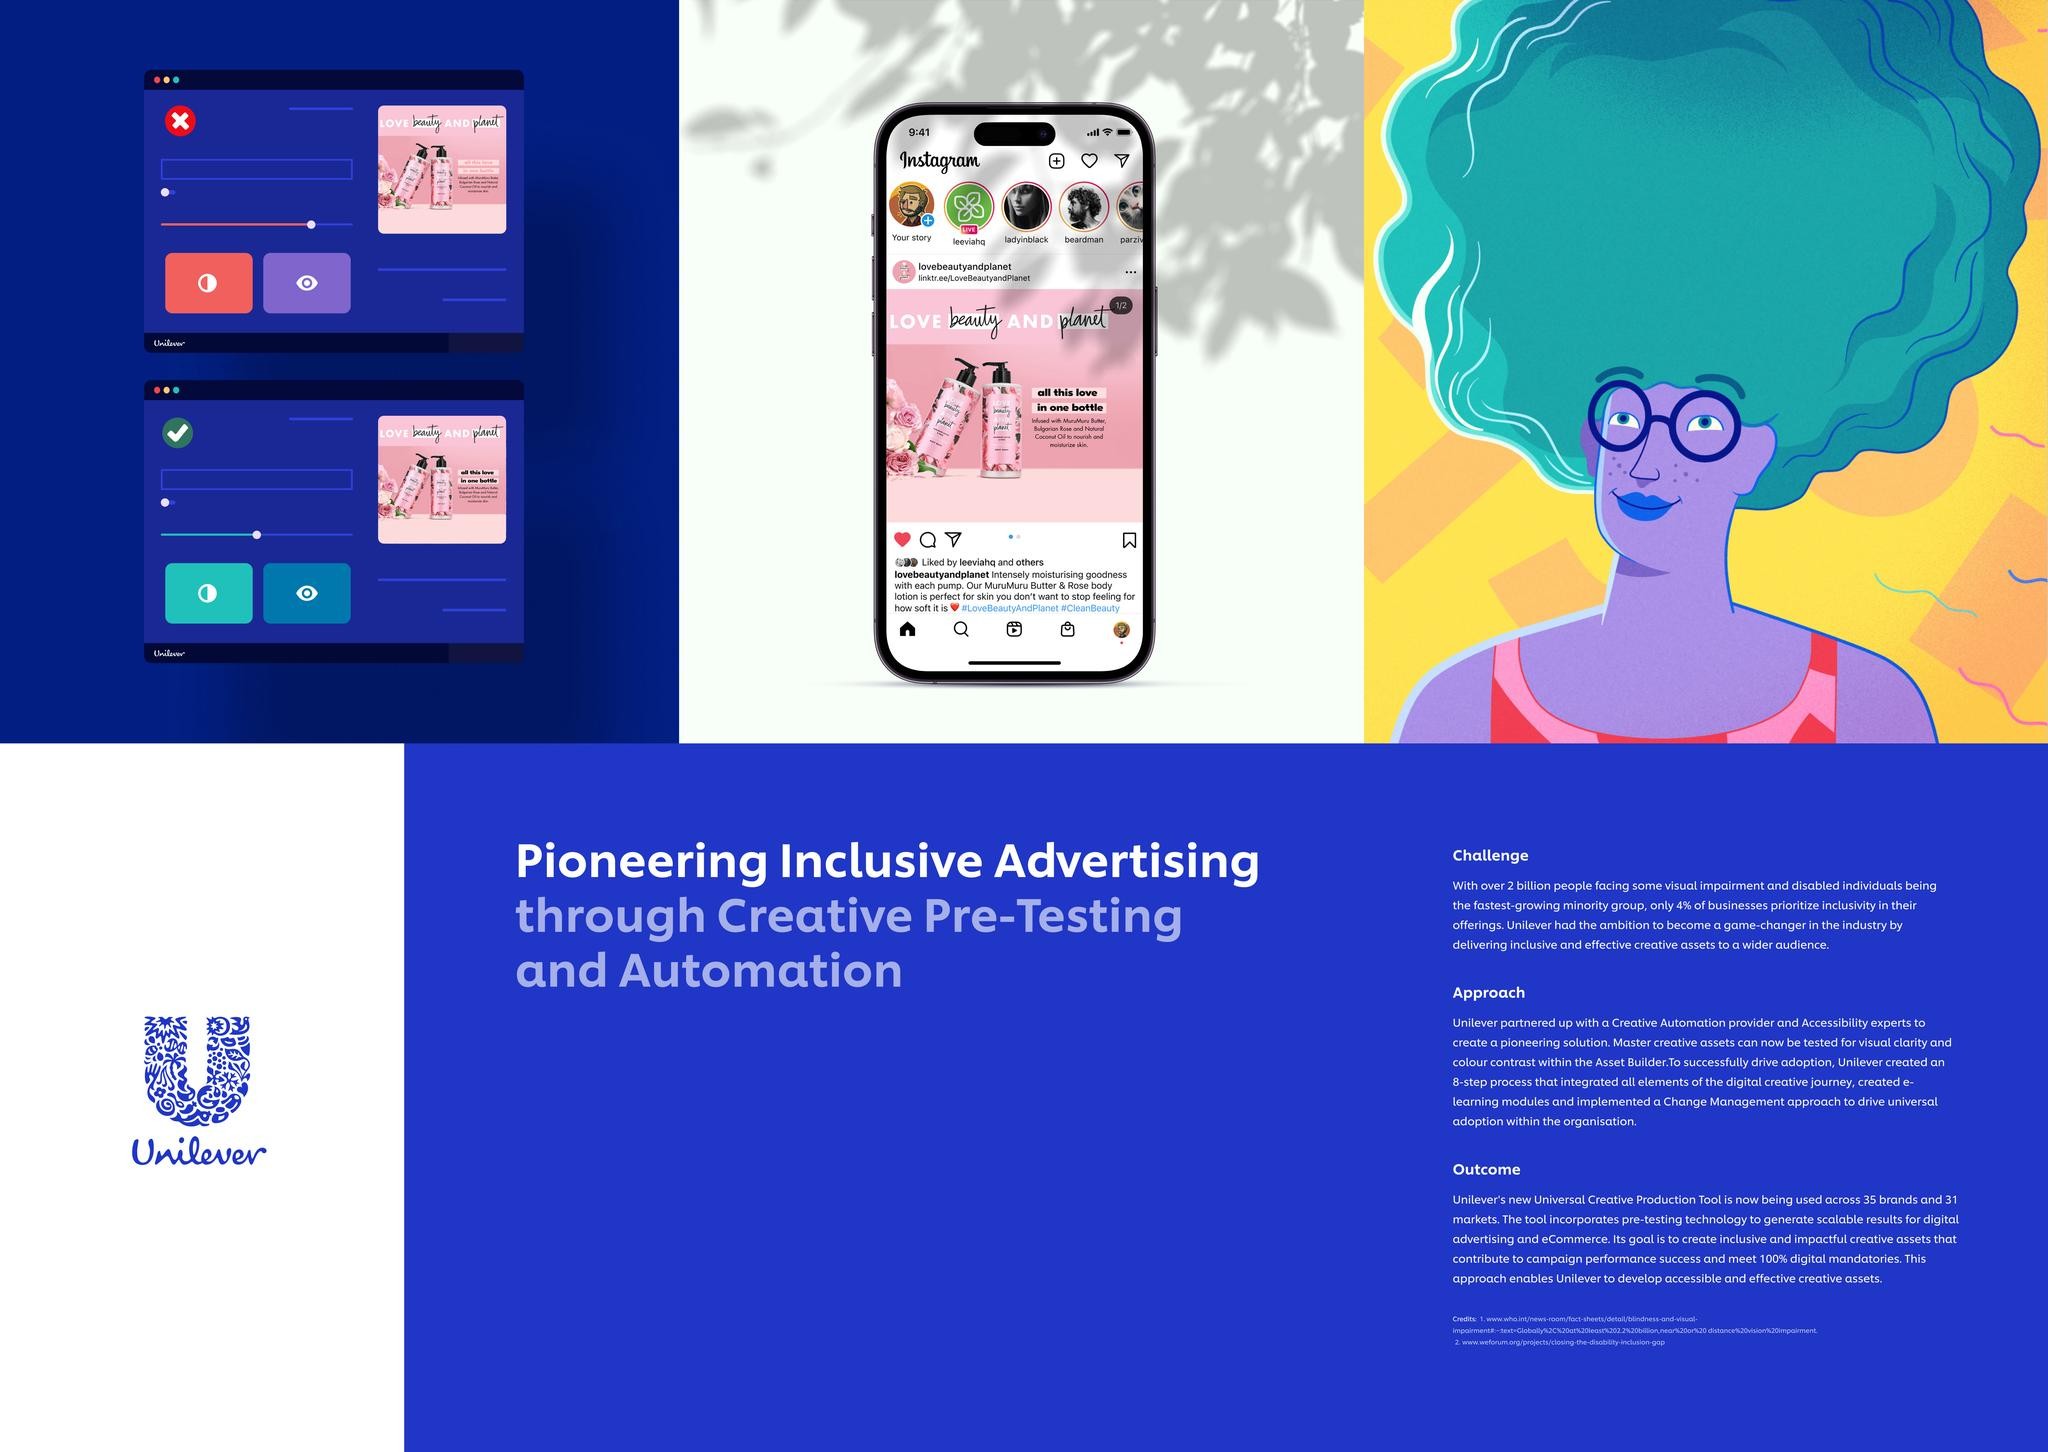 Pioneering Inclusive Advertising through Creative Pre-Testing and Automation